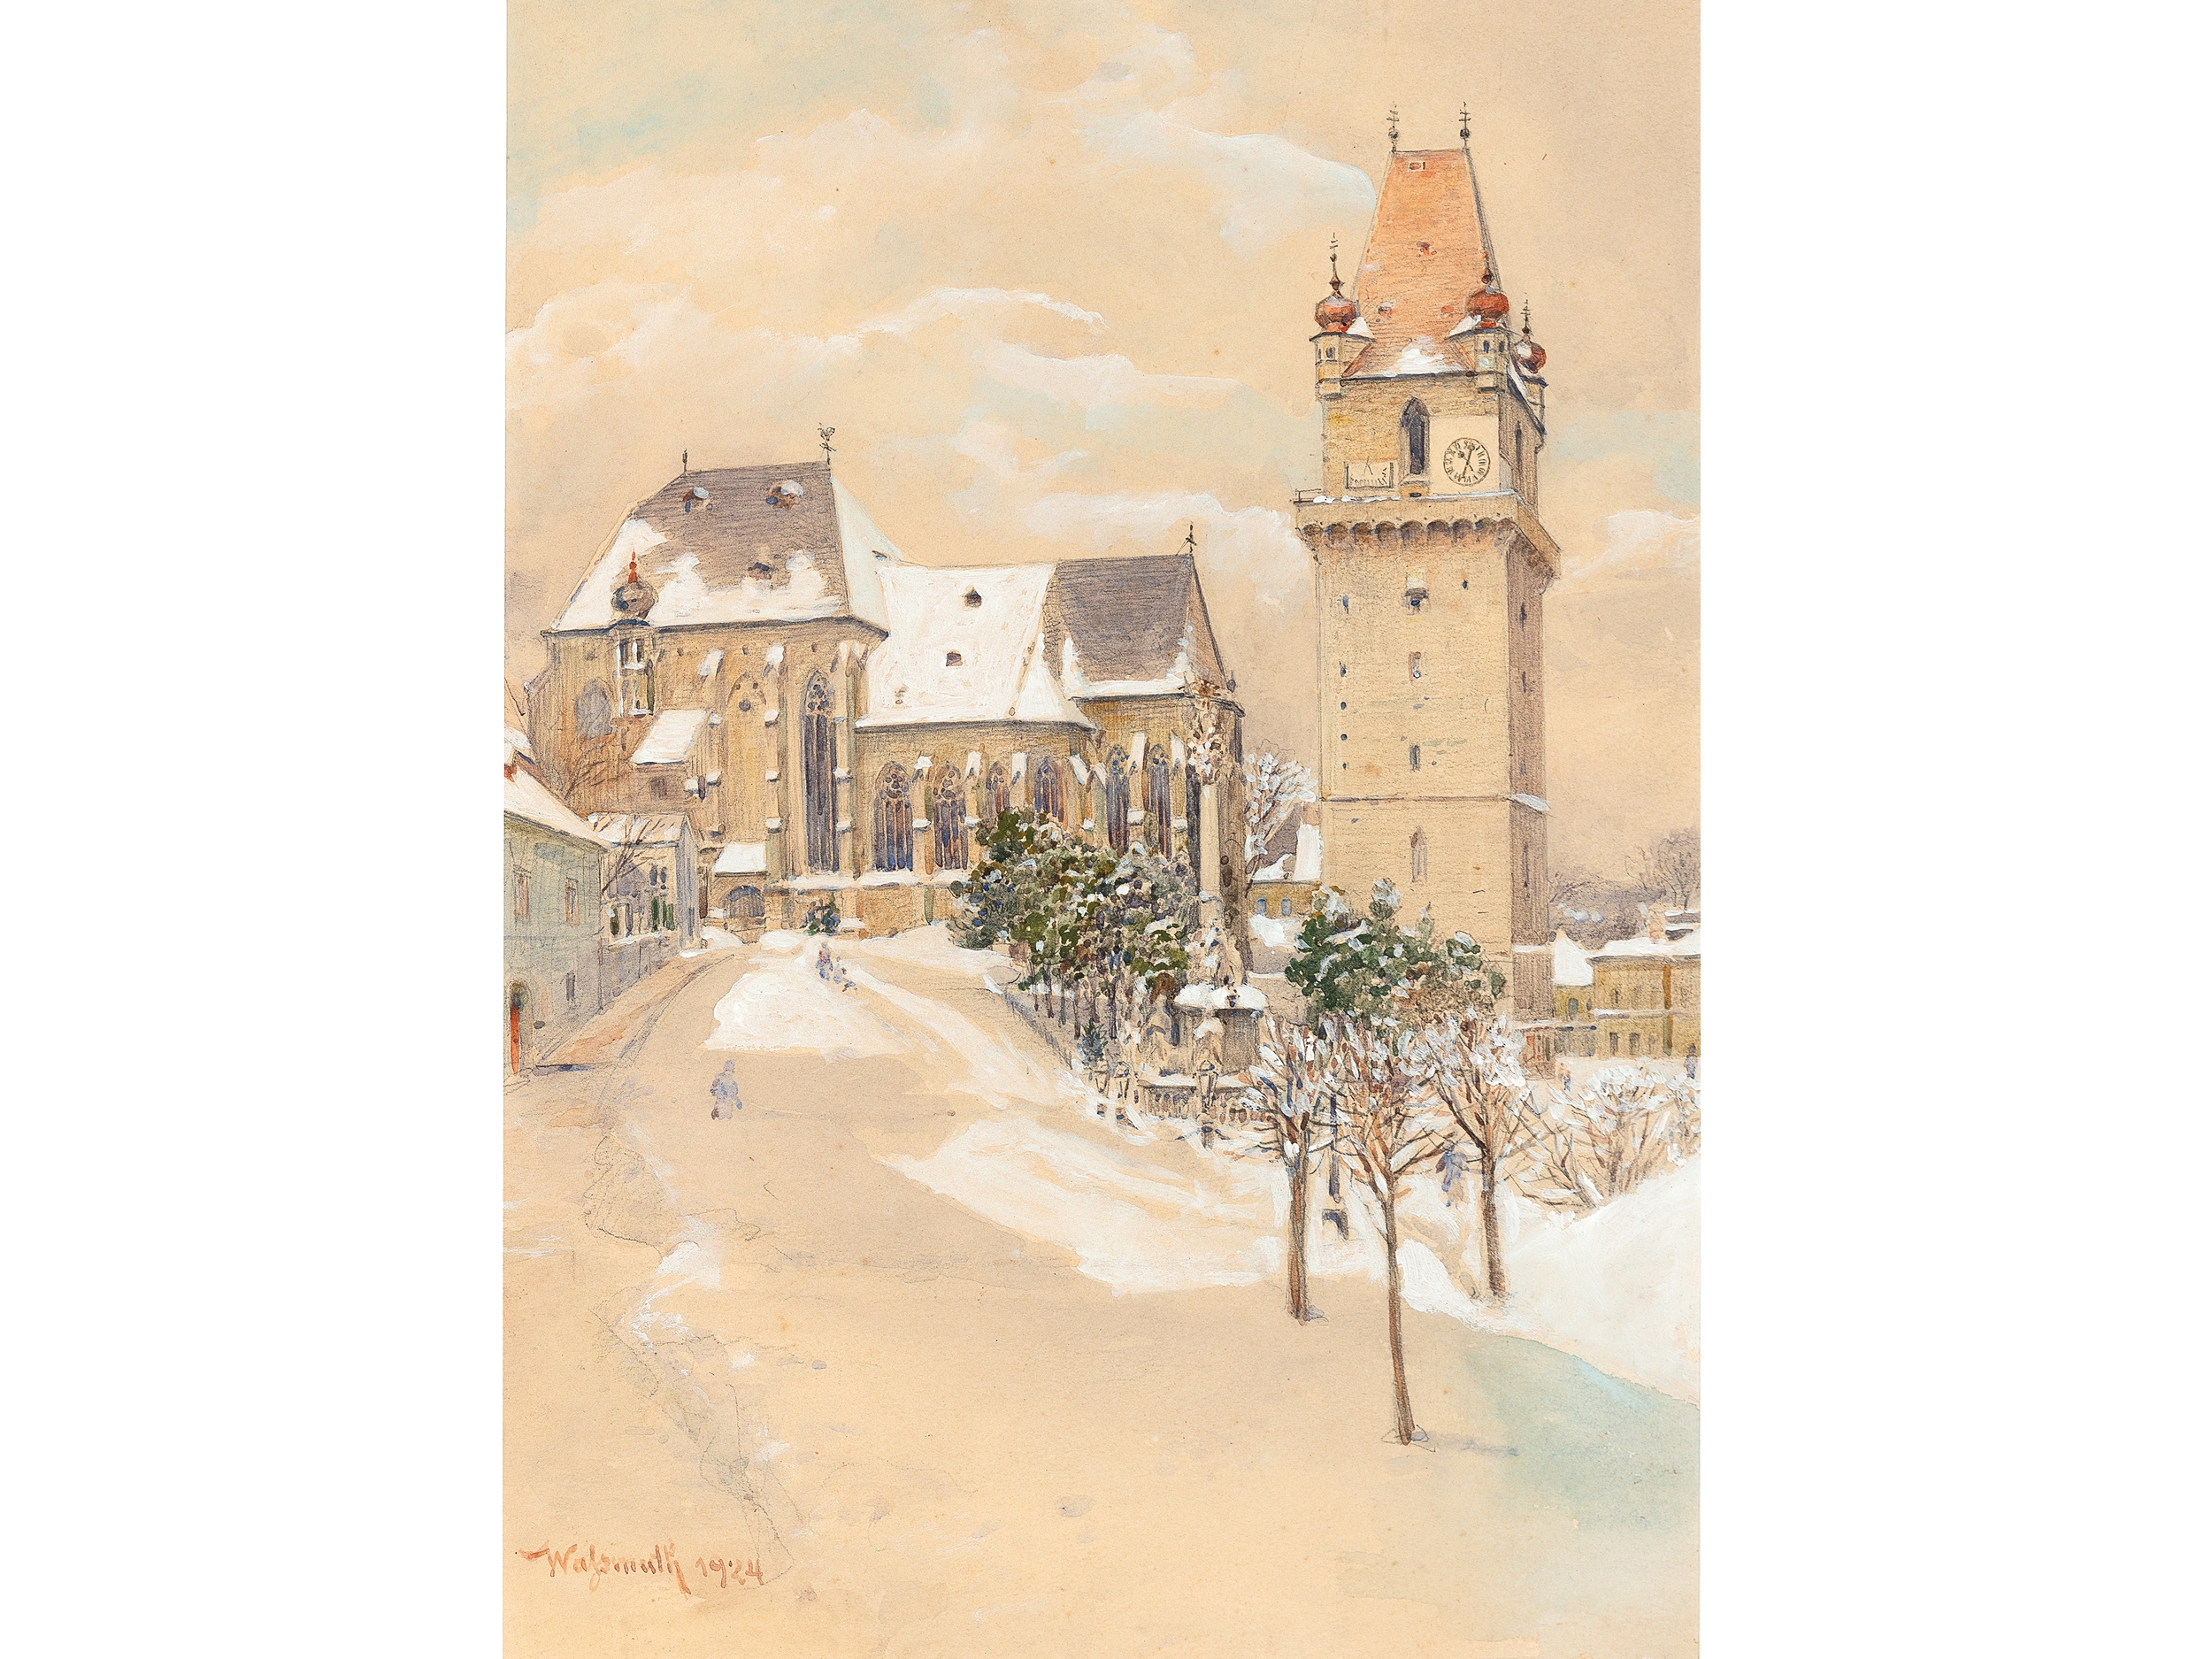 Artwork by Heinrich Waßmuth, View of Perchtoldsdorf, Made of Mixed media on paper